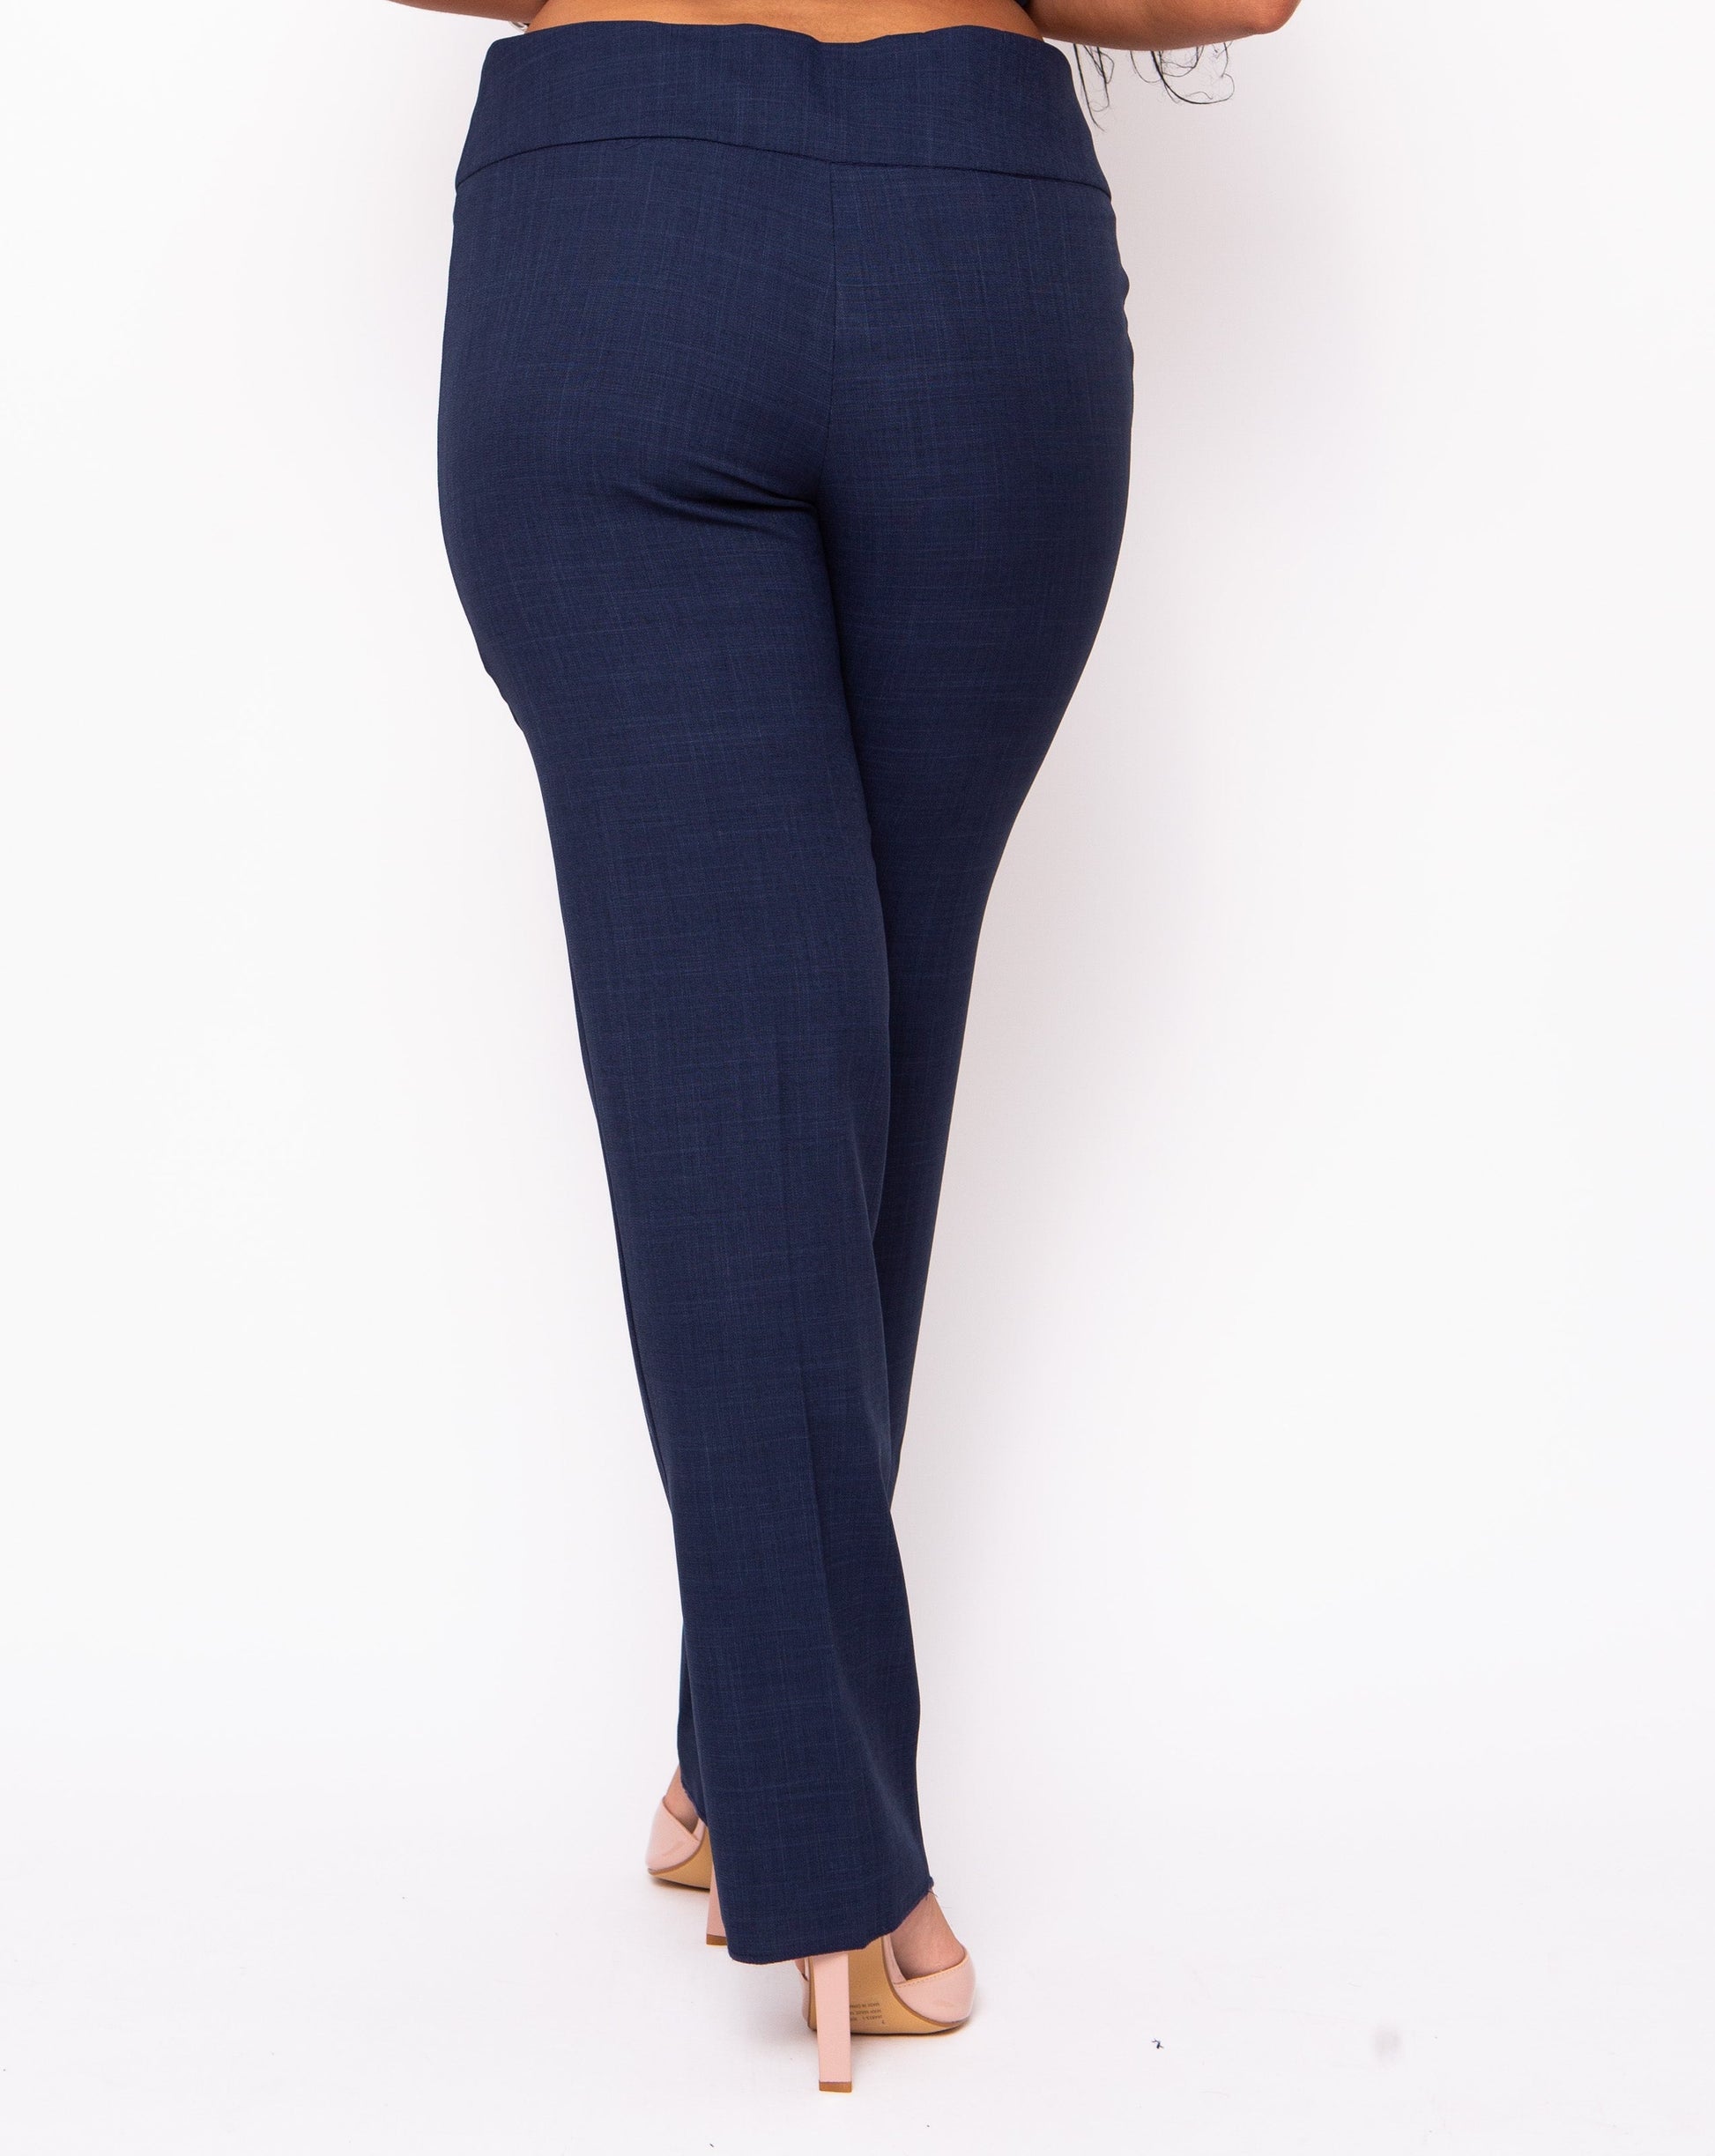 Low-waist Fitted Pants in Navy Blue